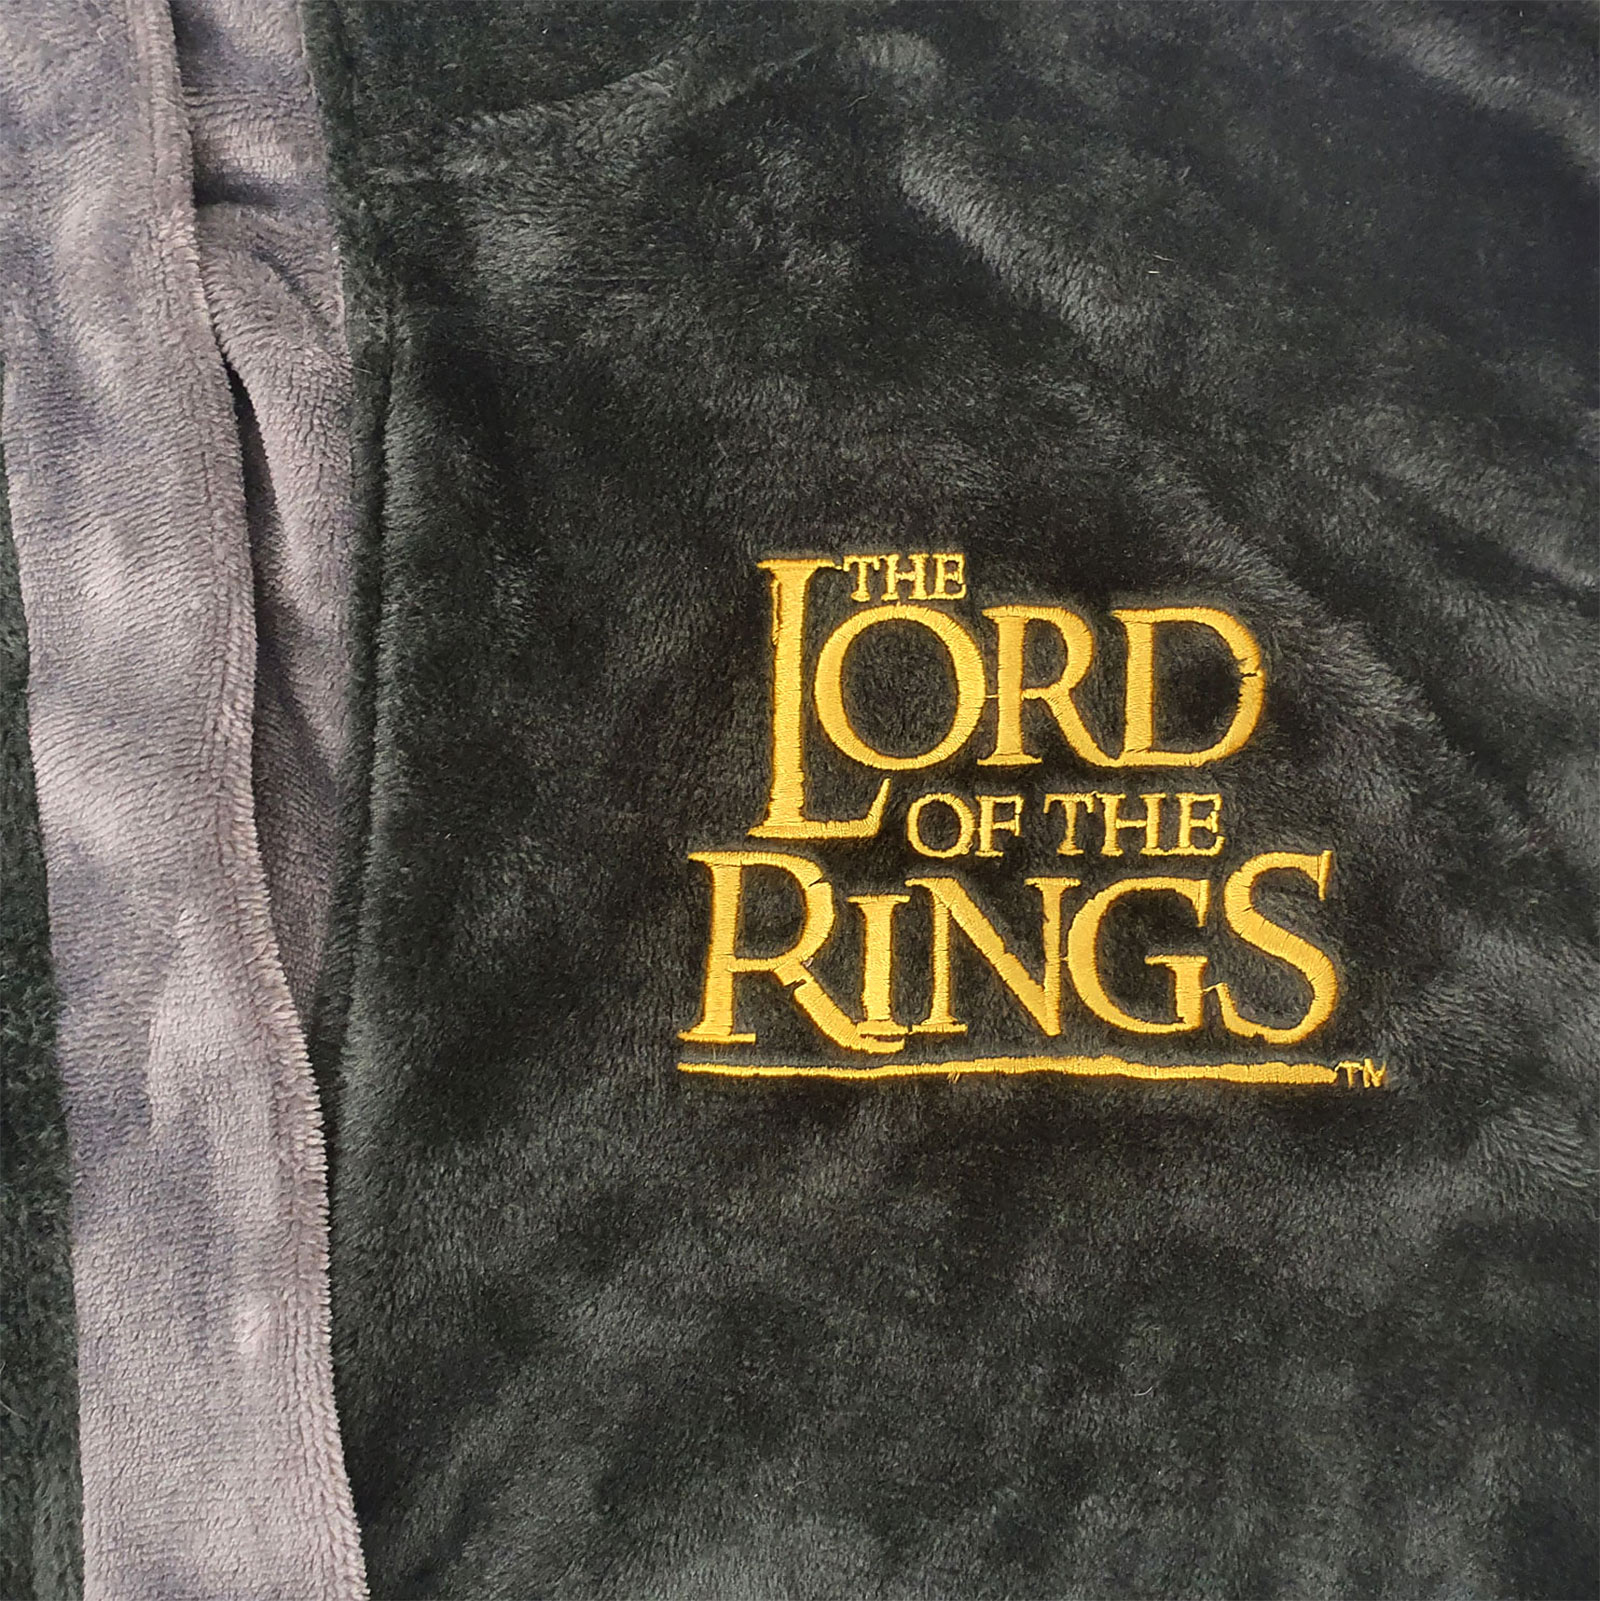 Together for Gondor Bathrobe - Lord of the Rings